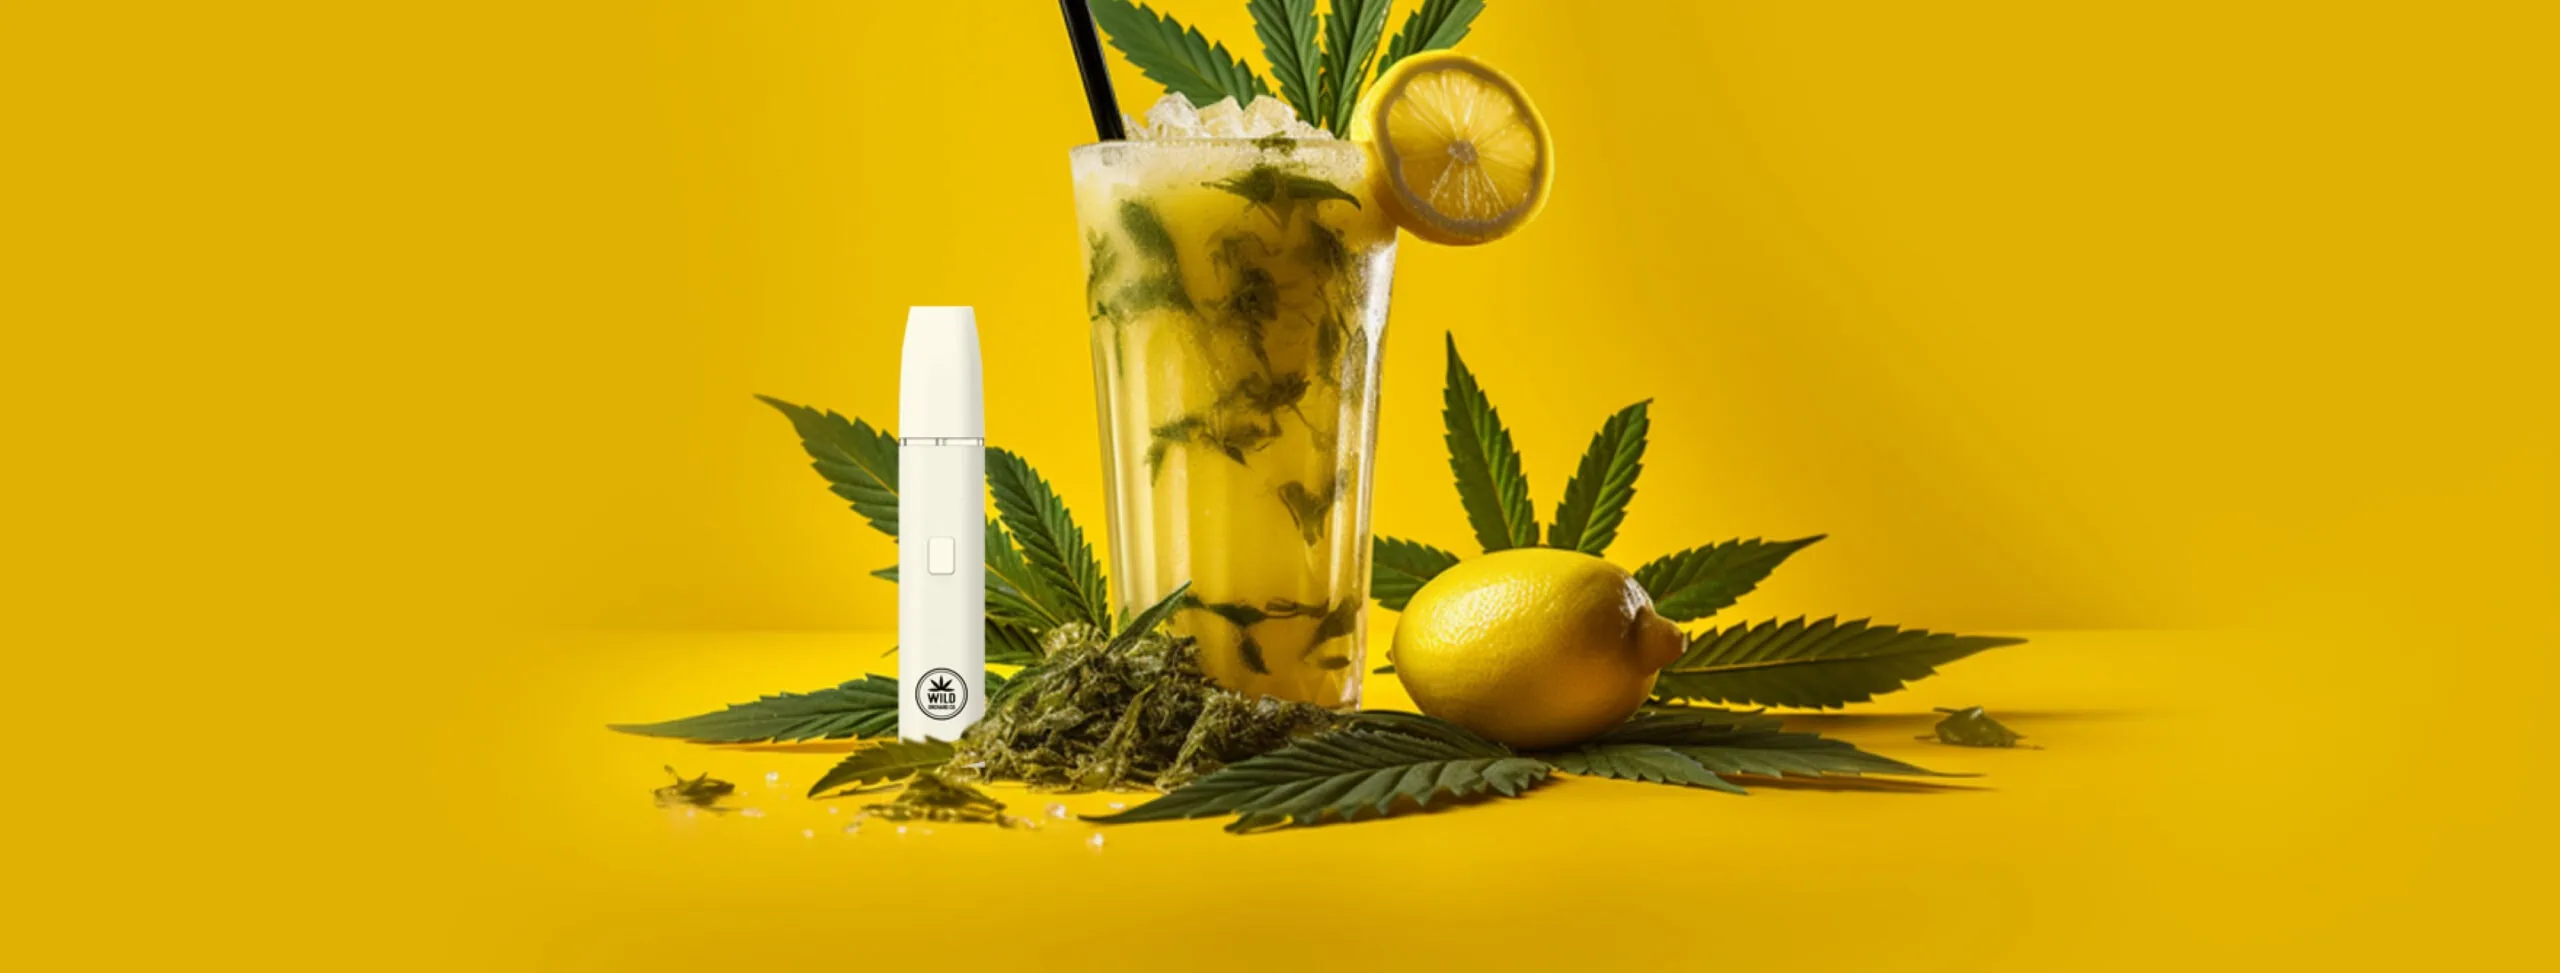 A cannabis-infused beverage setup with a lemon, cbd oil, and marijuana leaves on a yellow background, with a THa Cartridge.